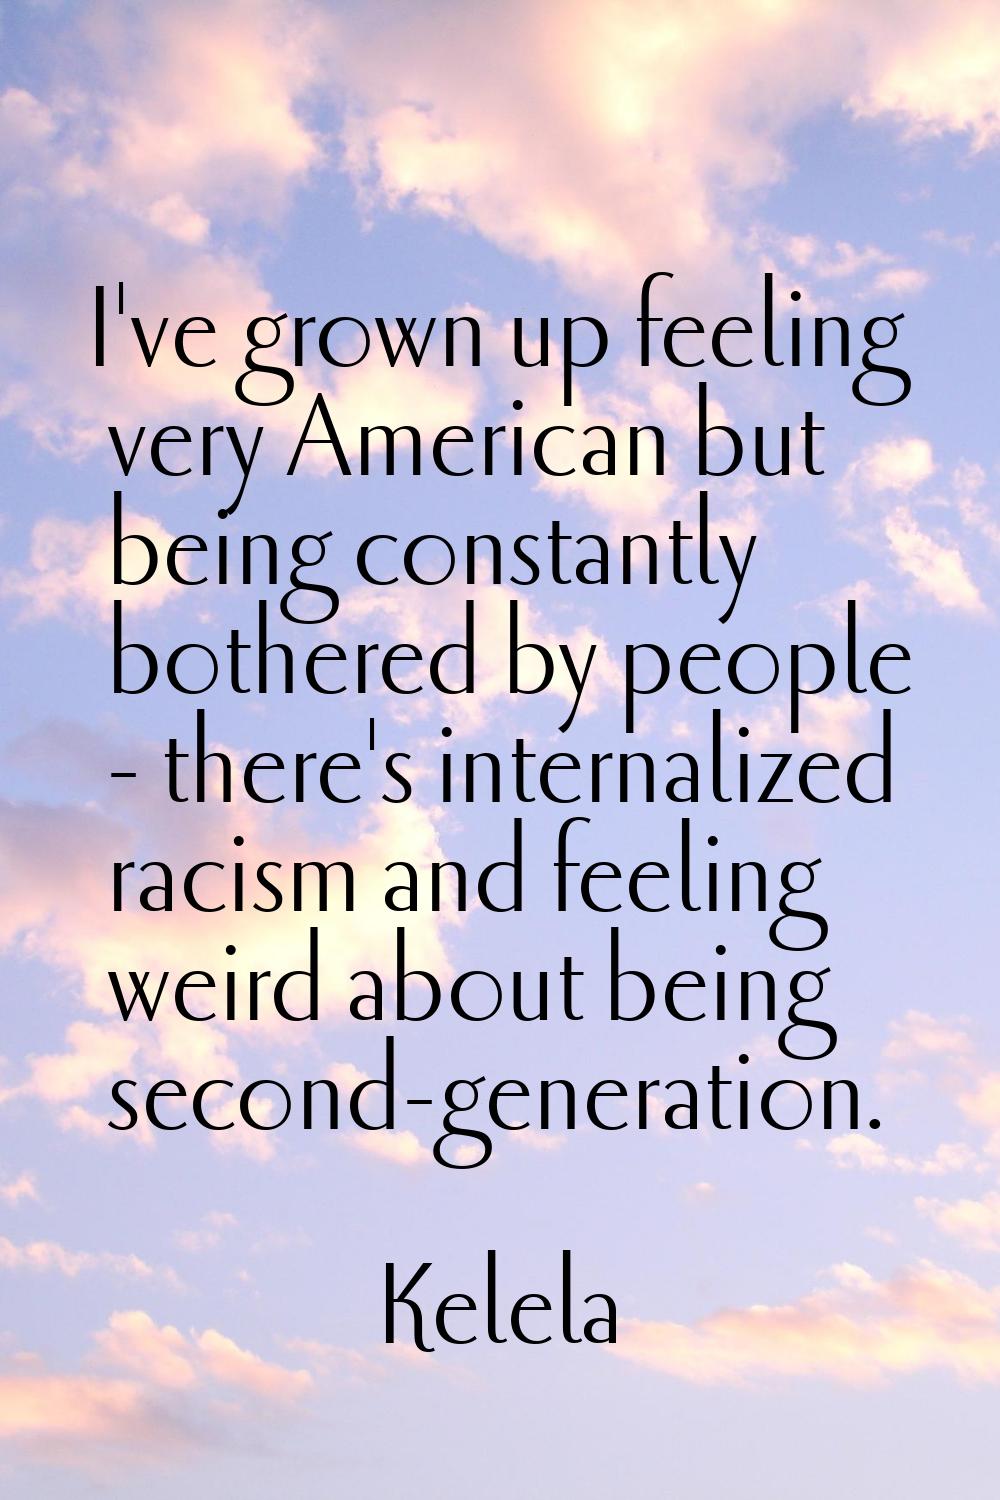 I've grown up feeling very American but being constantly bothered by people - there's internalized 